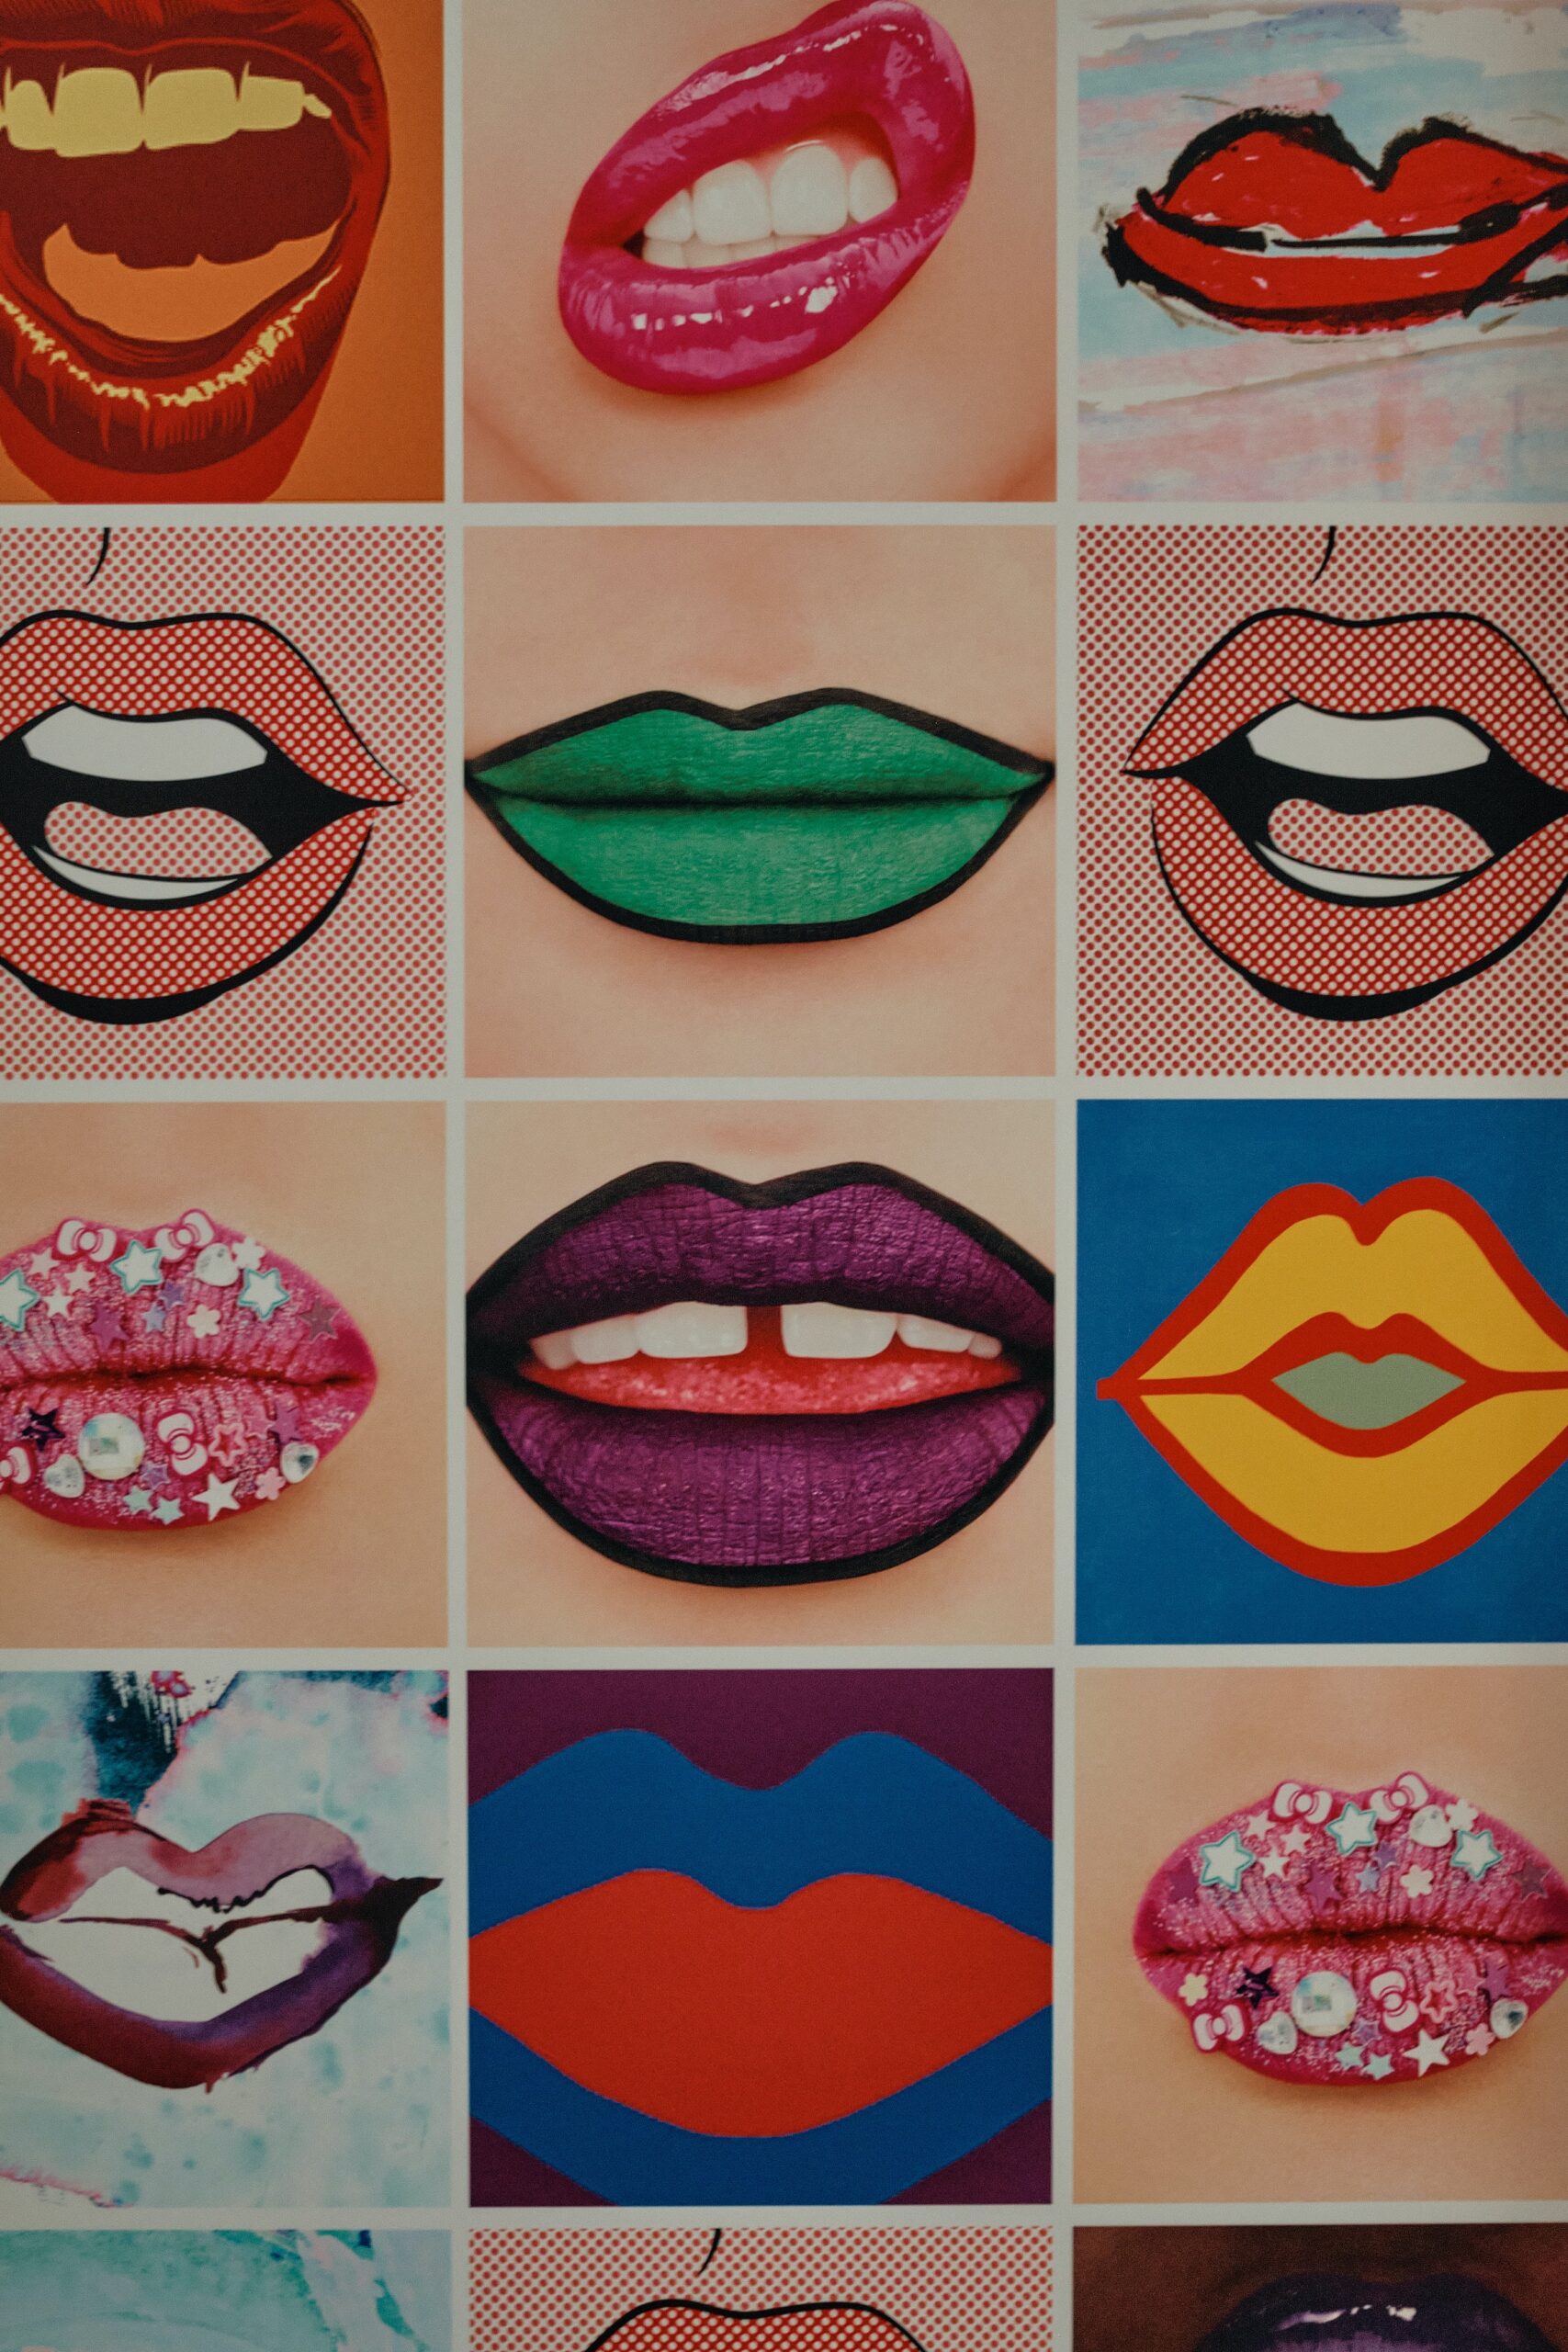 Collage of mouth pictures by Clem Onojeghuo